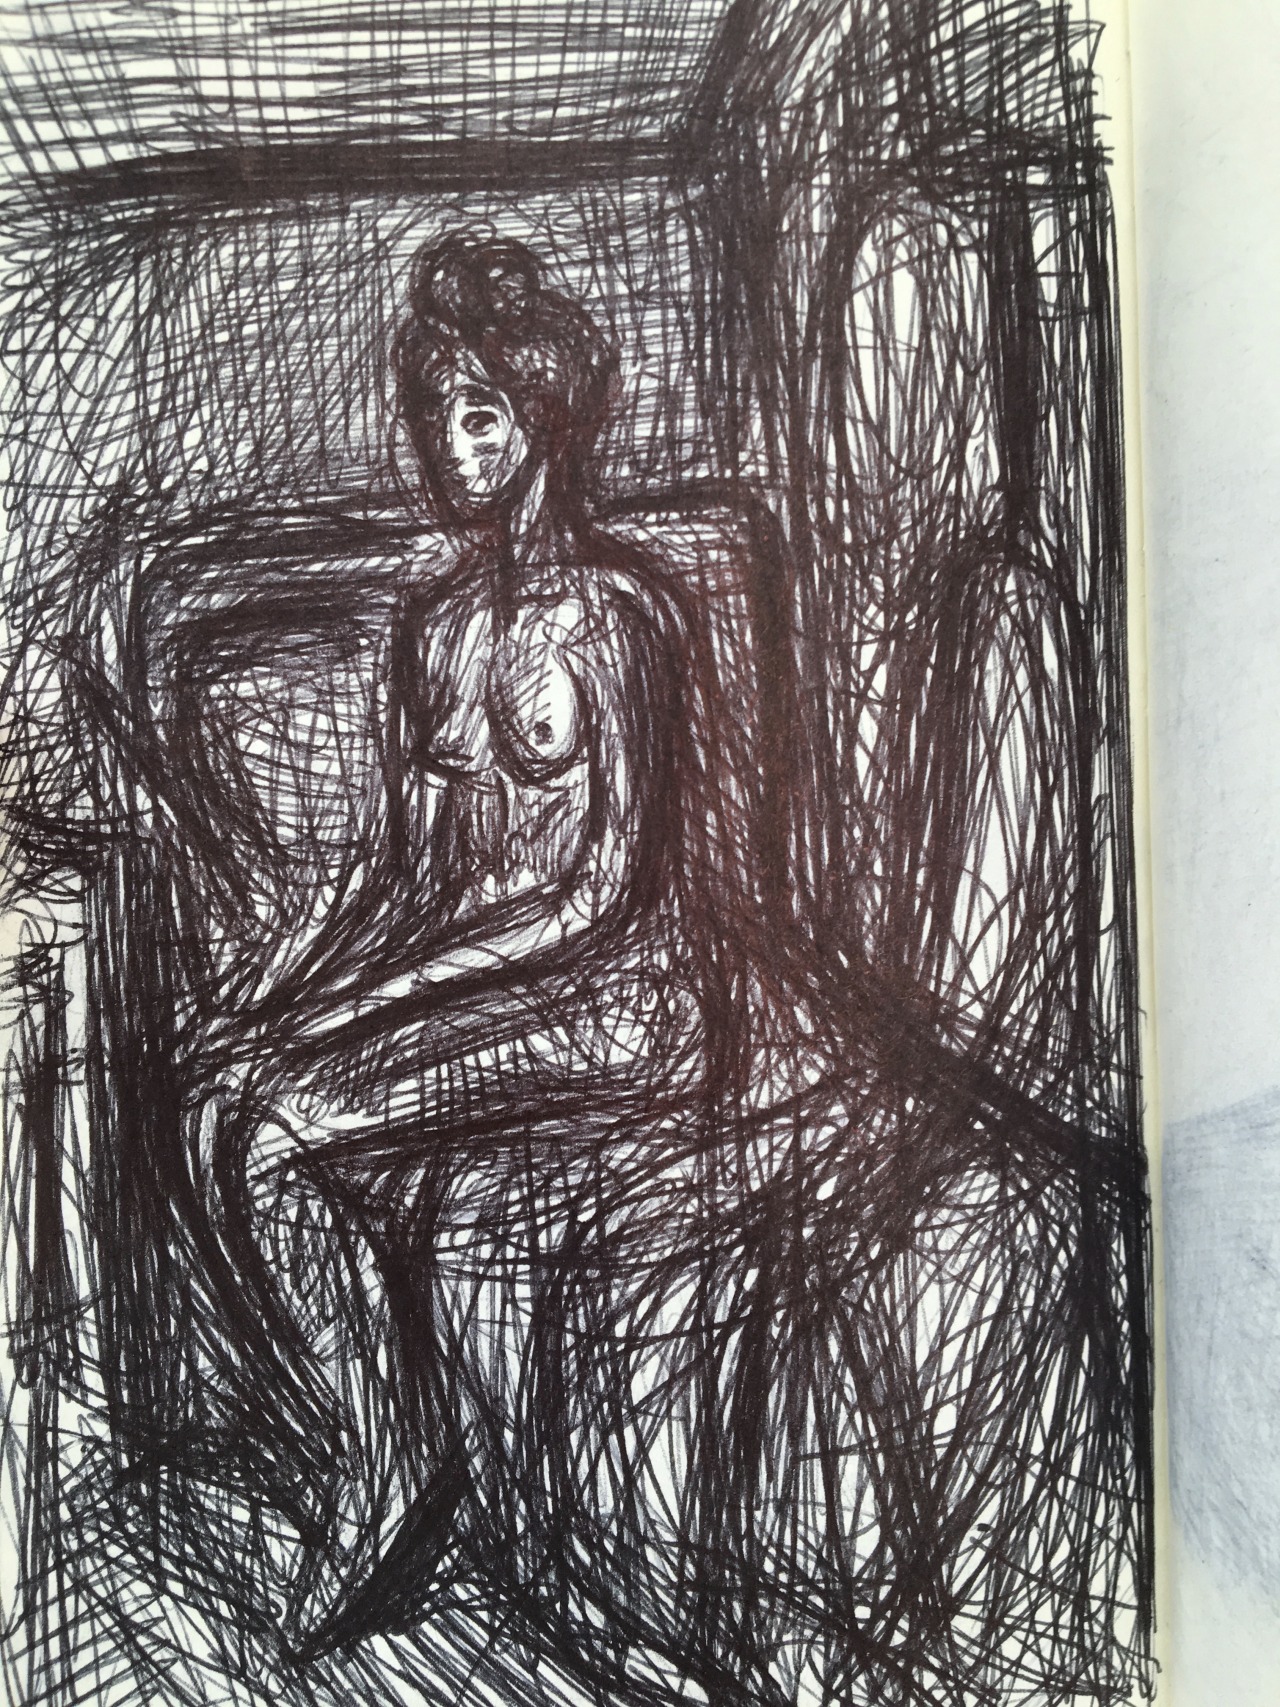 Seated Nude on the Edge of the Bed, Munch, Stockholm, 2020.